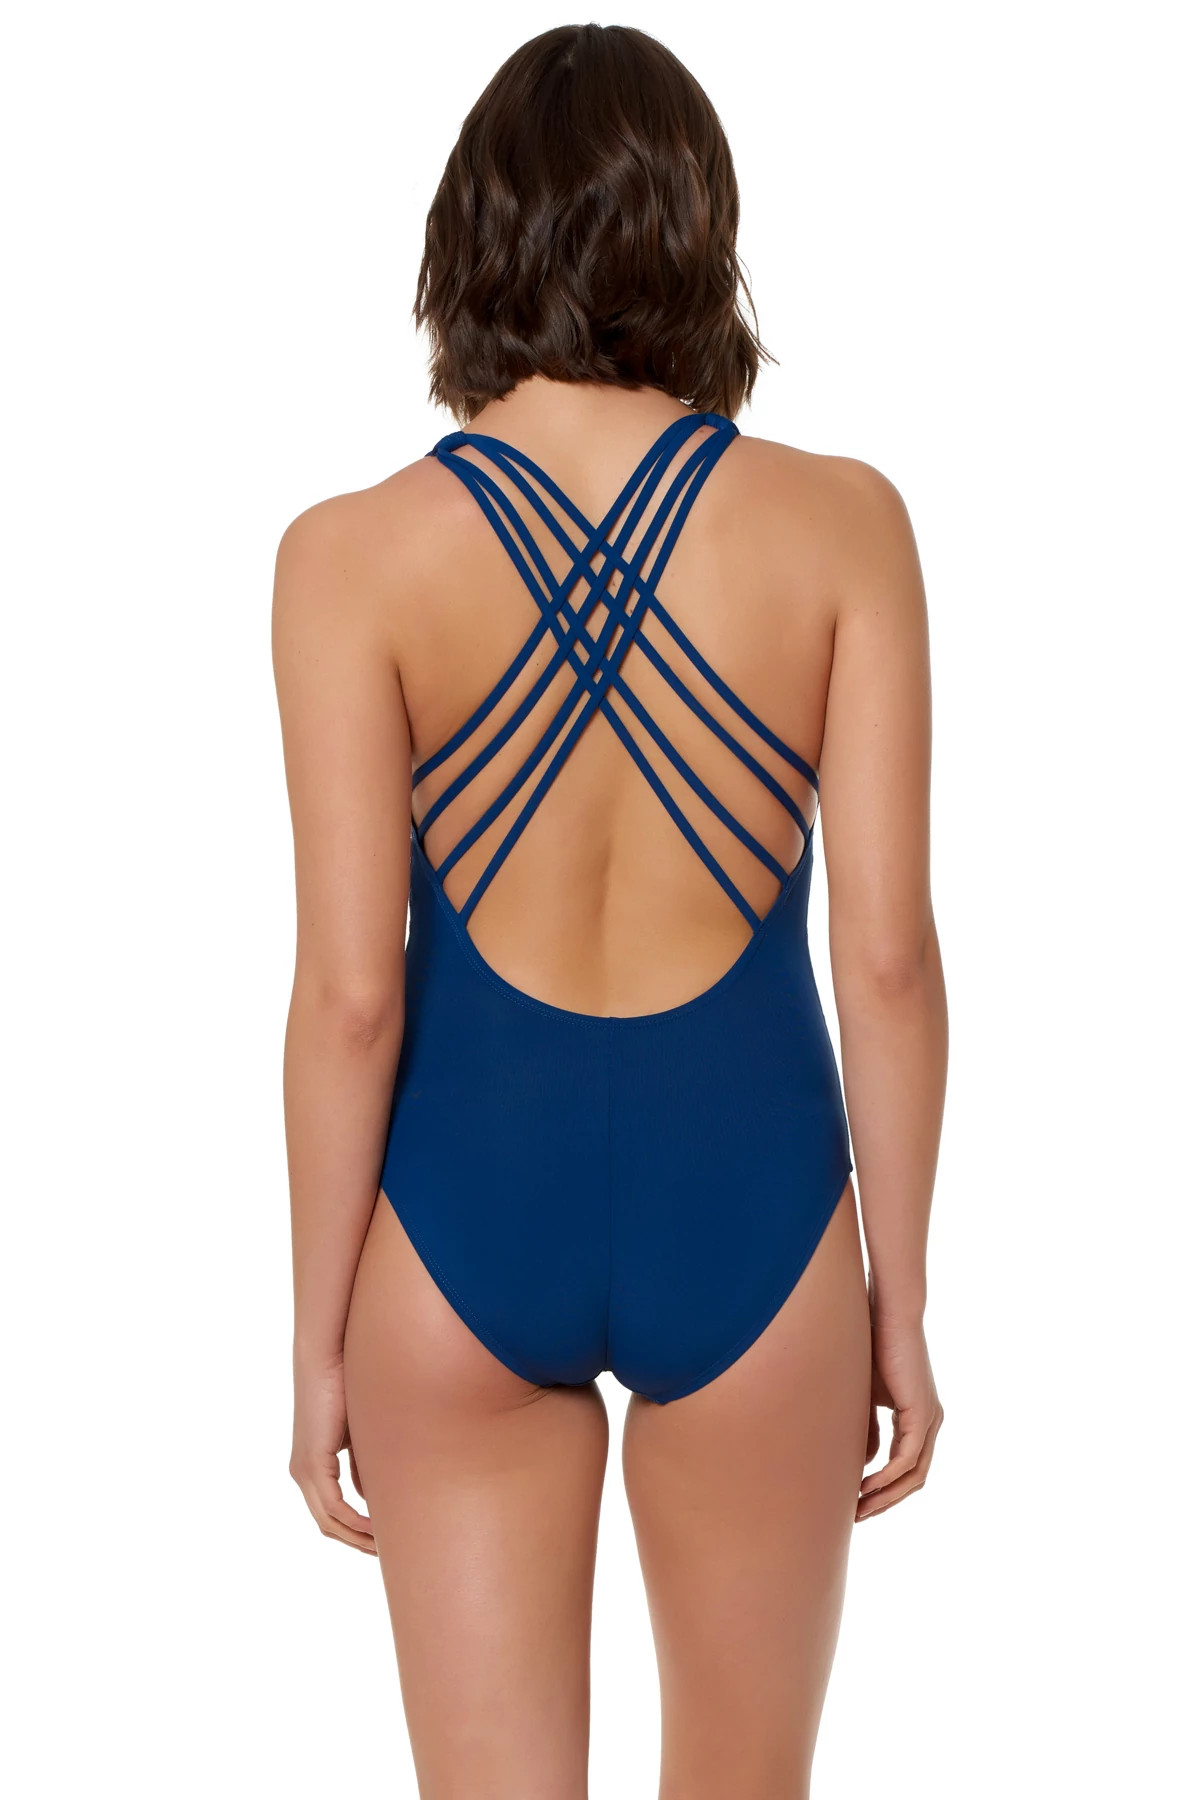 NAVY Mesh Inset One Piece Swimsuit image number 2